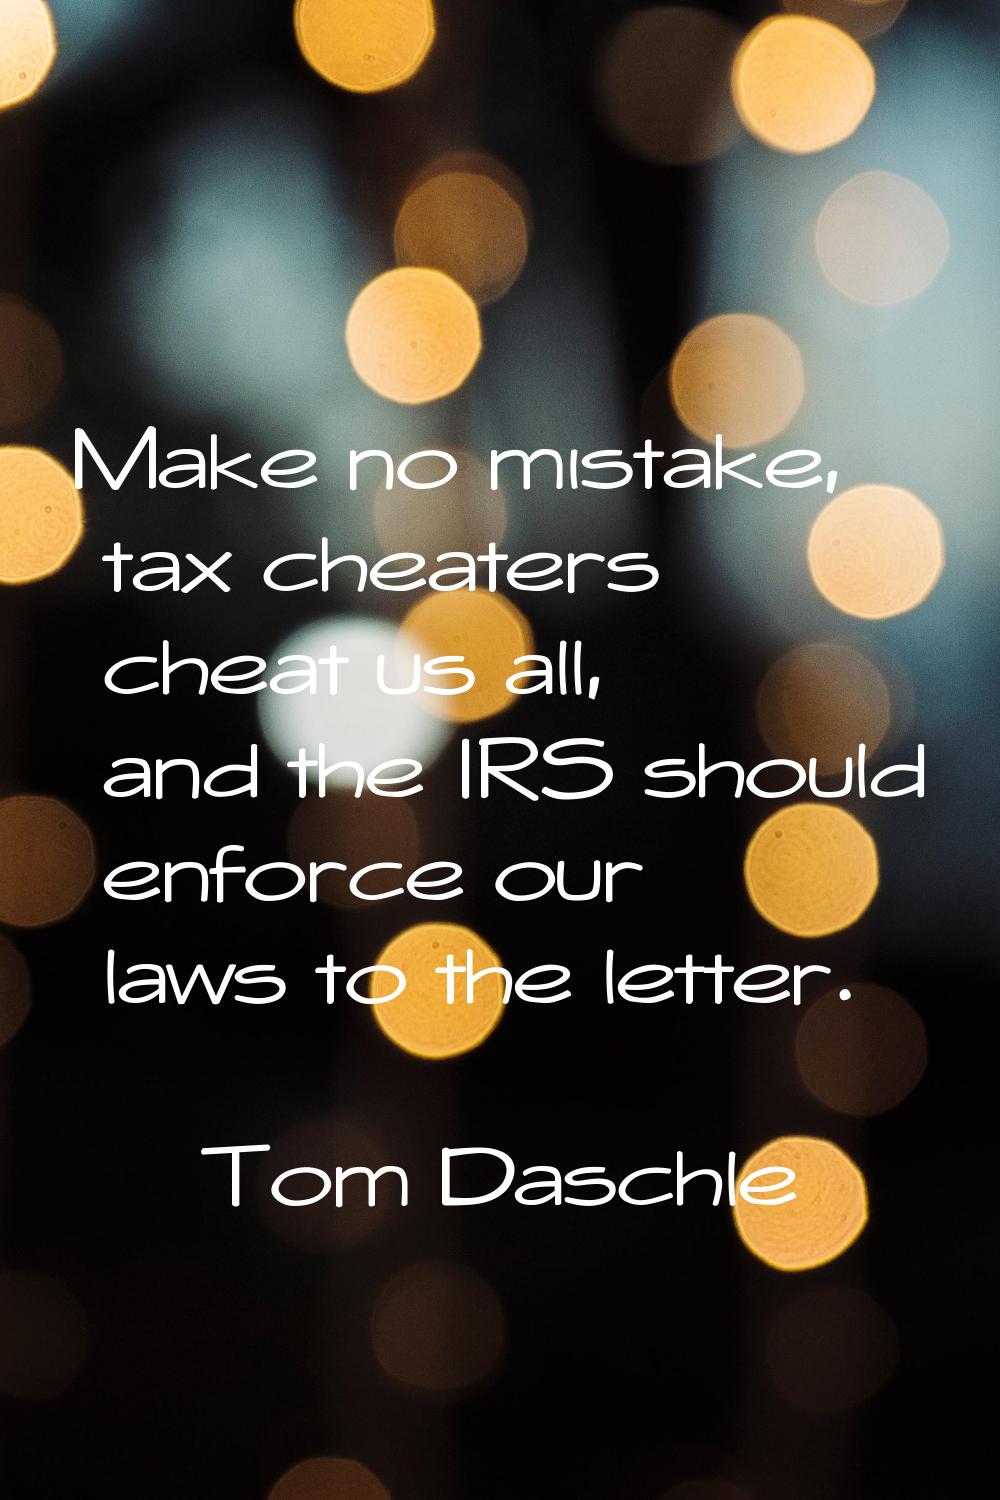 Make no mistake, tax cheaters cheat us all, and the IRS should enforce our laws to the letter.